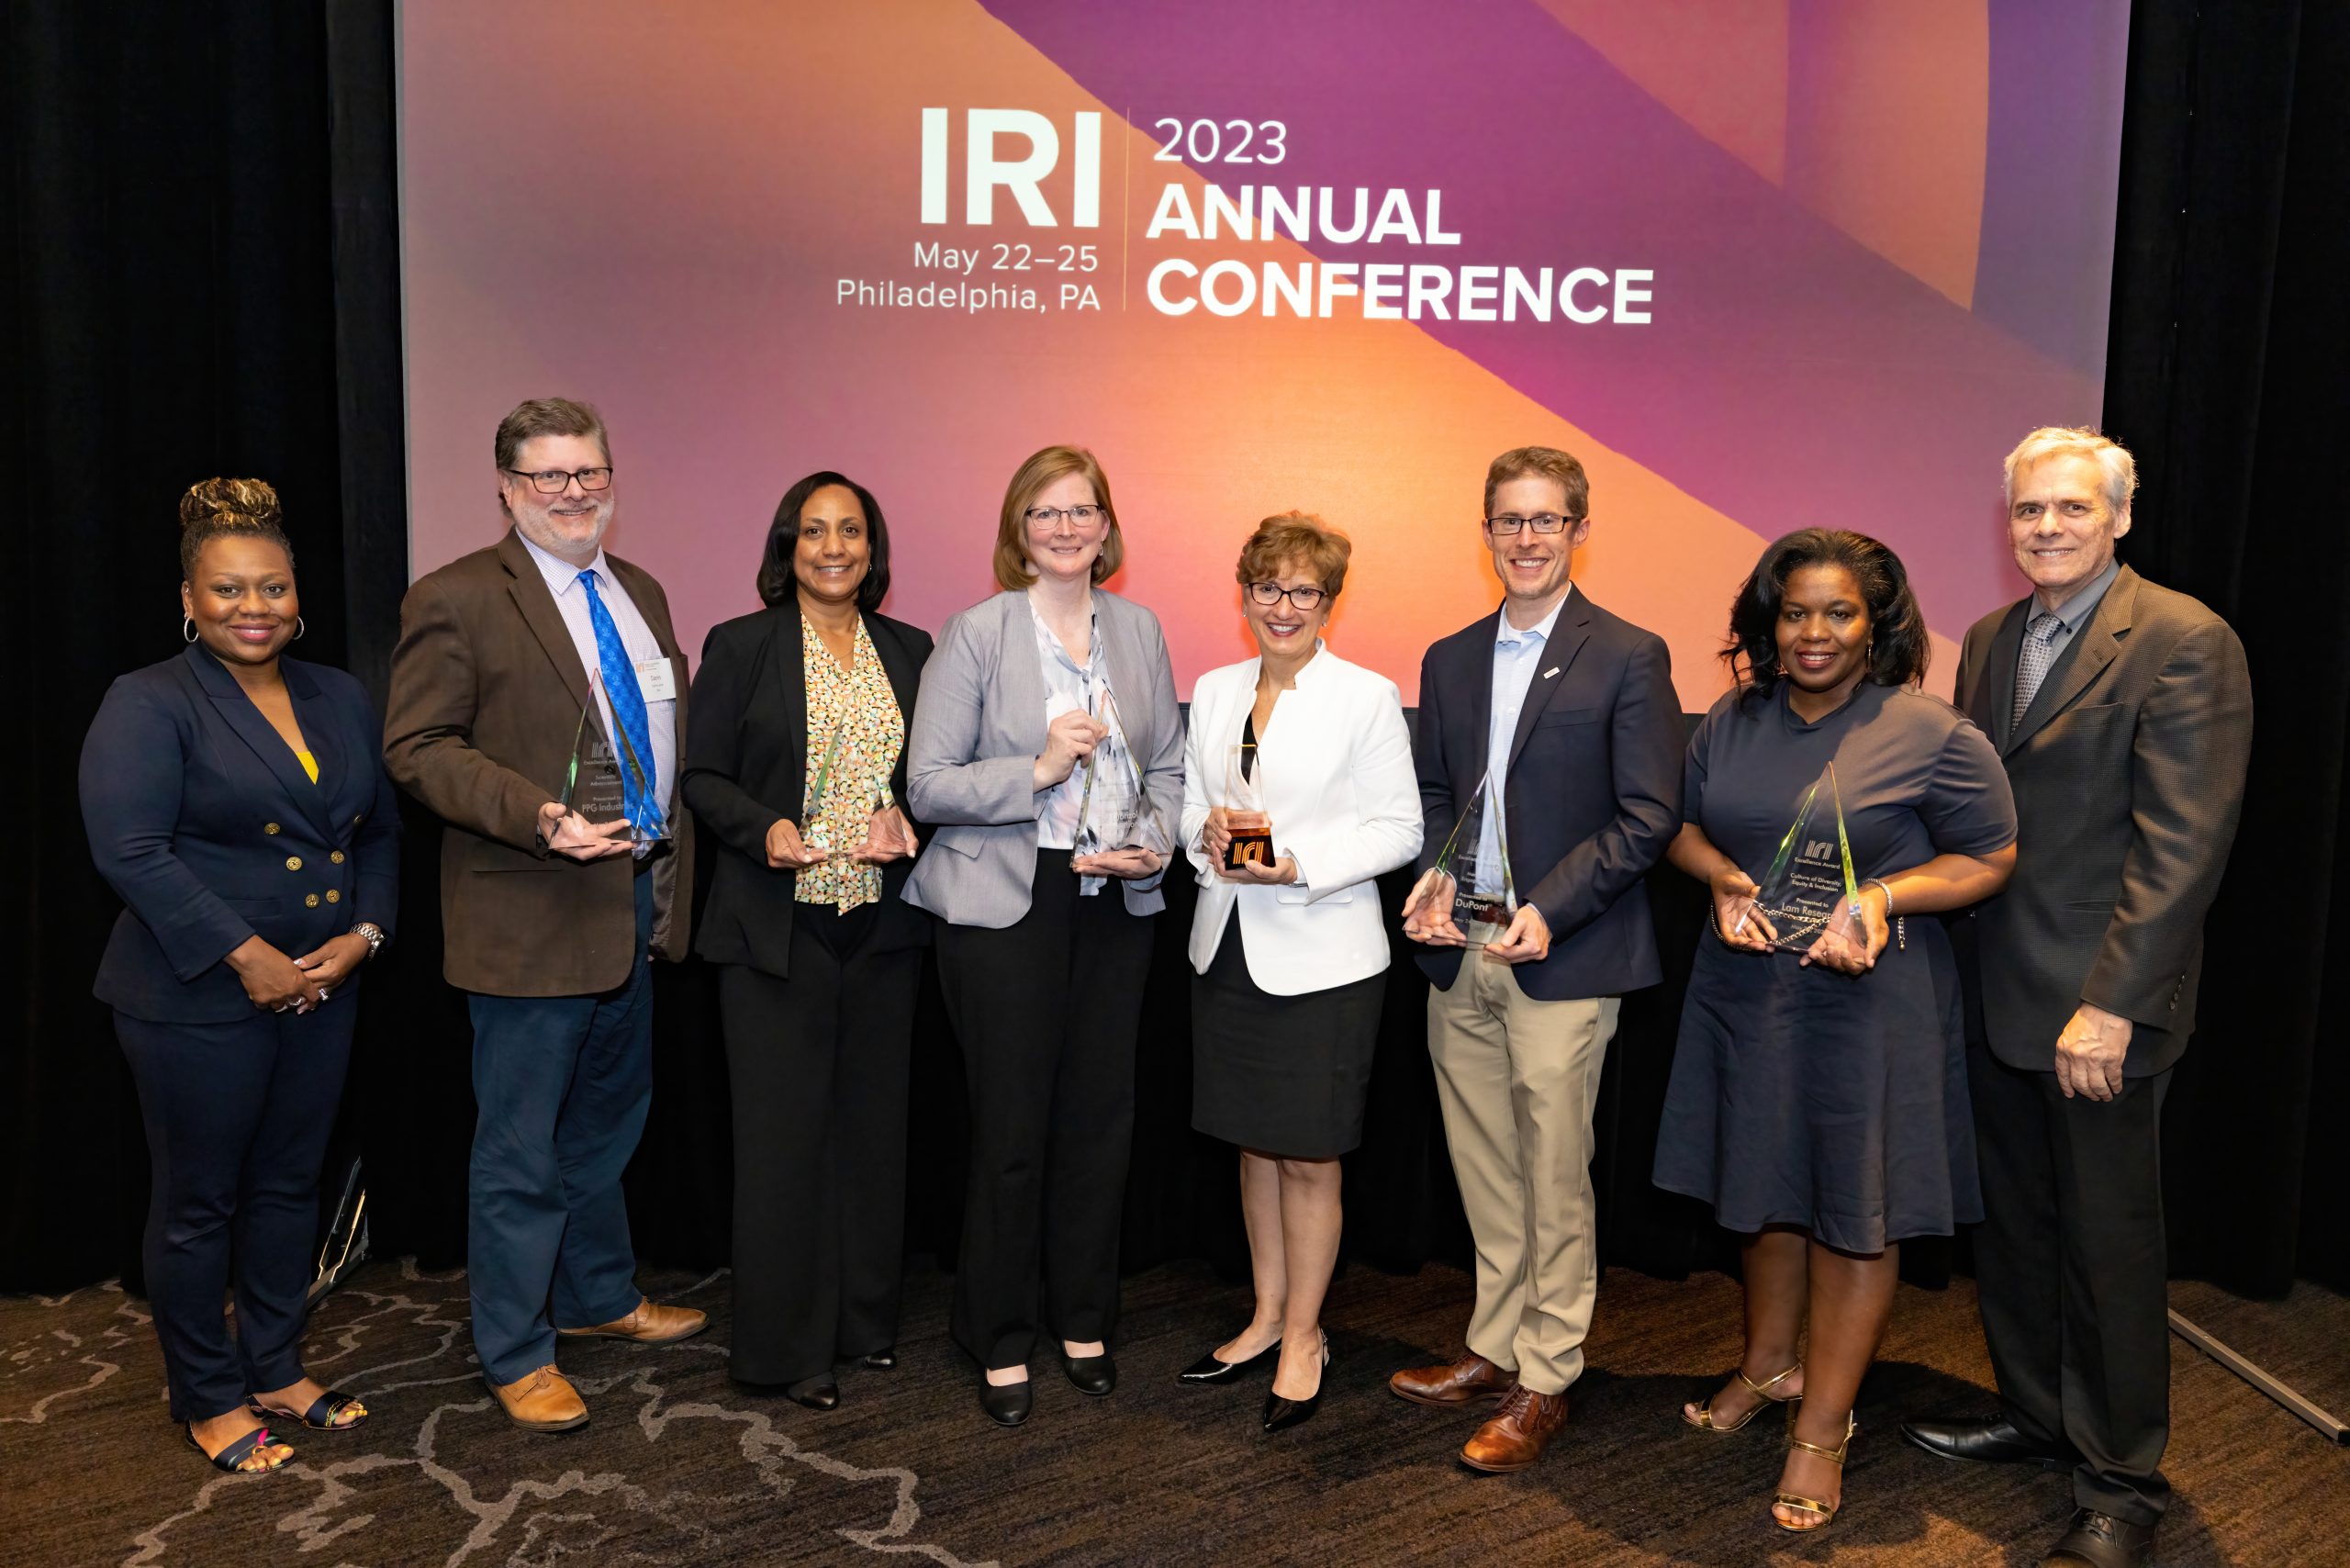 Press Release IRI Annual Conference Awards Innovation Research